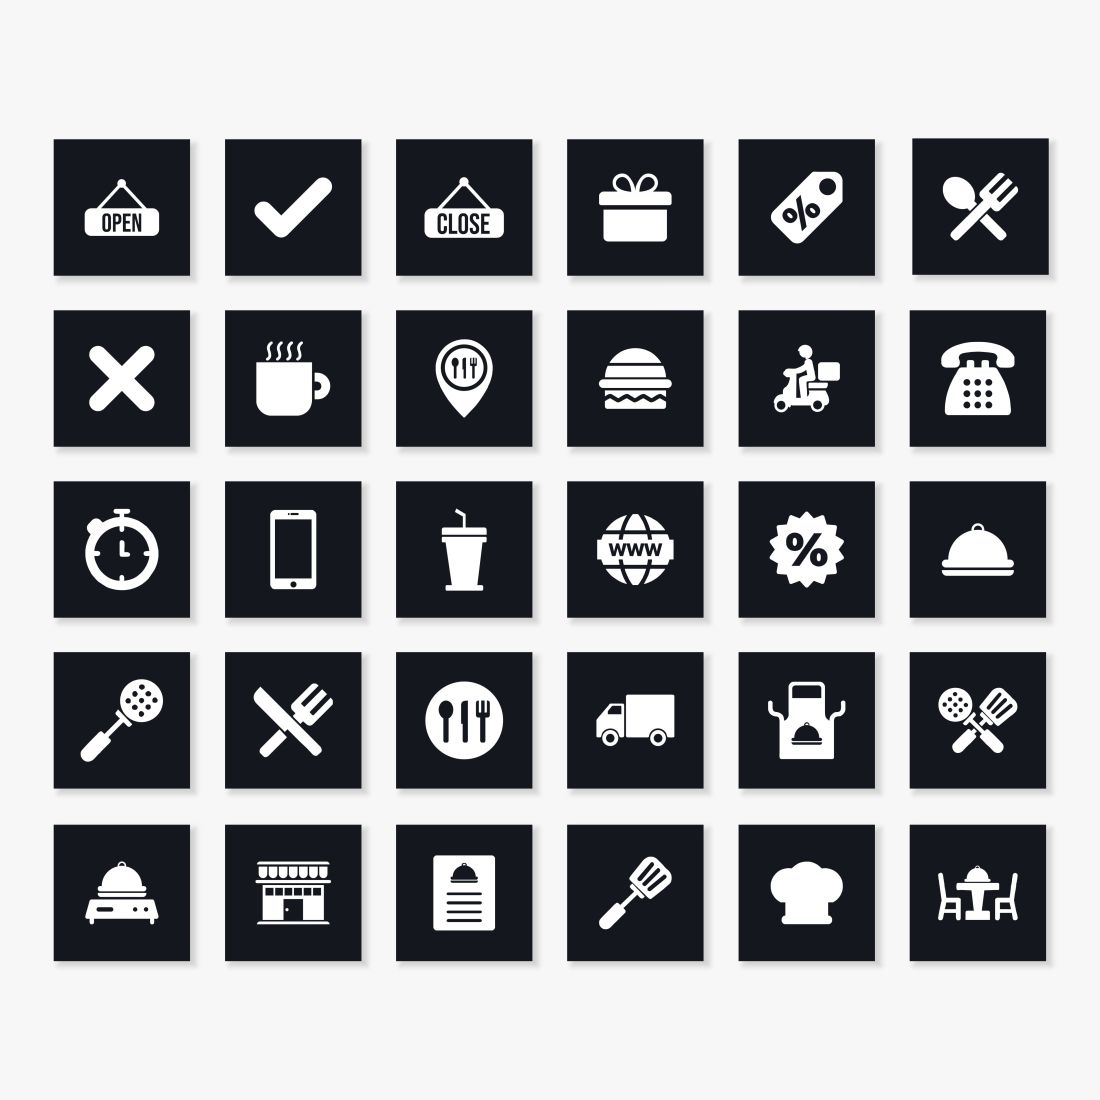 Food And Restaurant Instagram Post Canva Instagram Templates Icons.